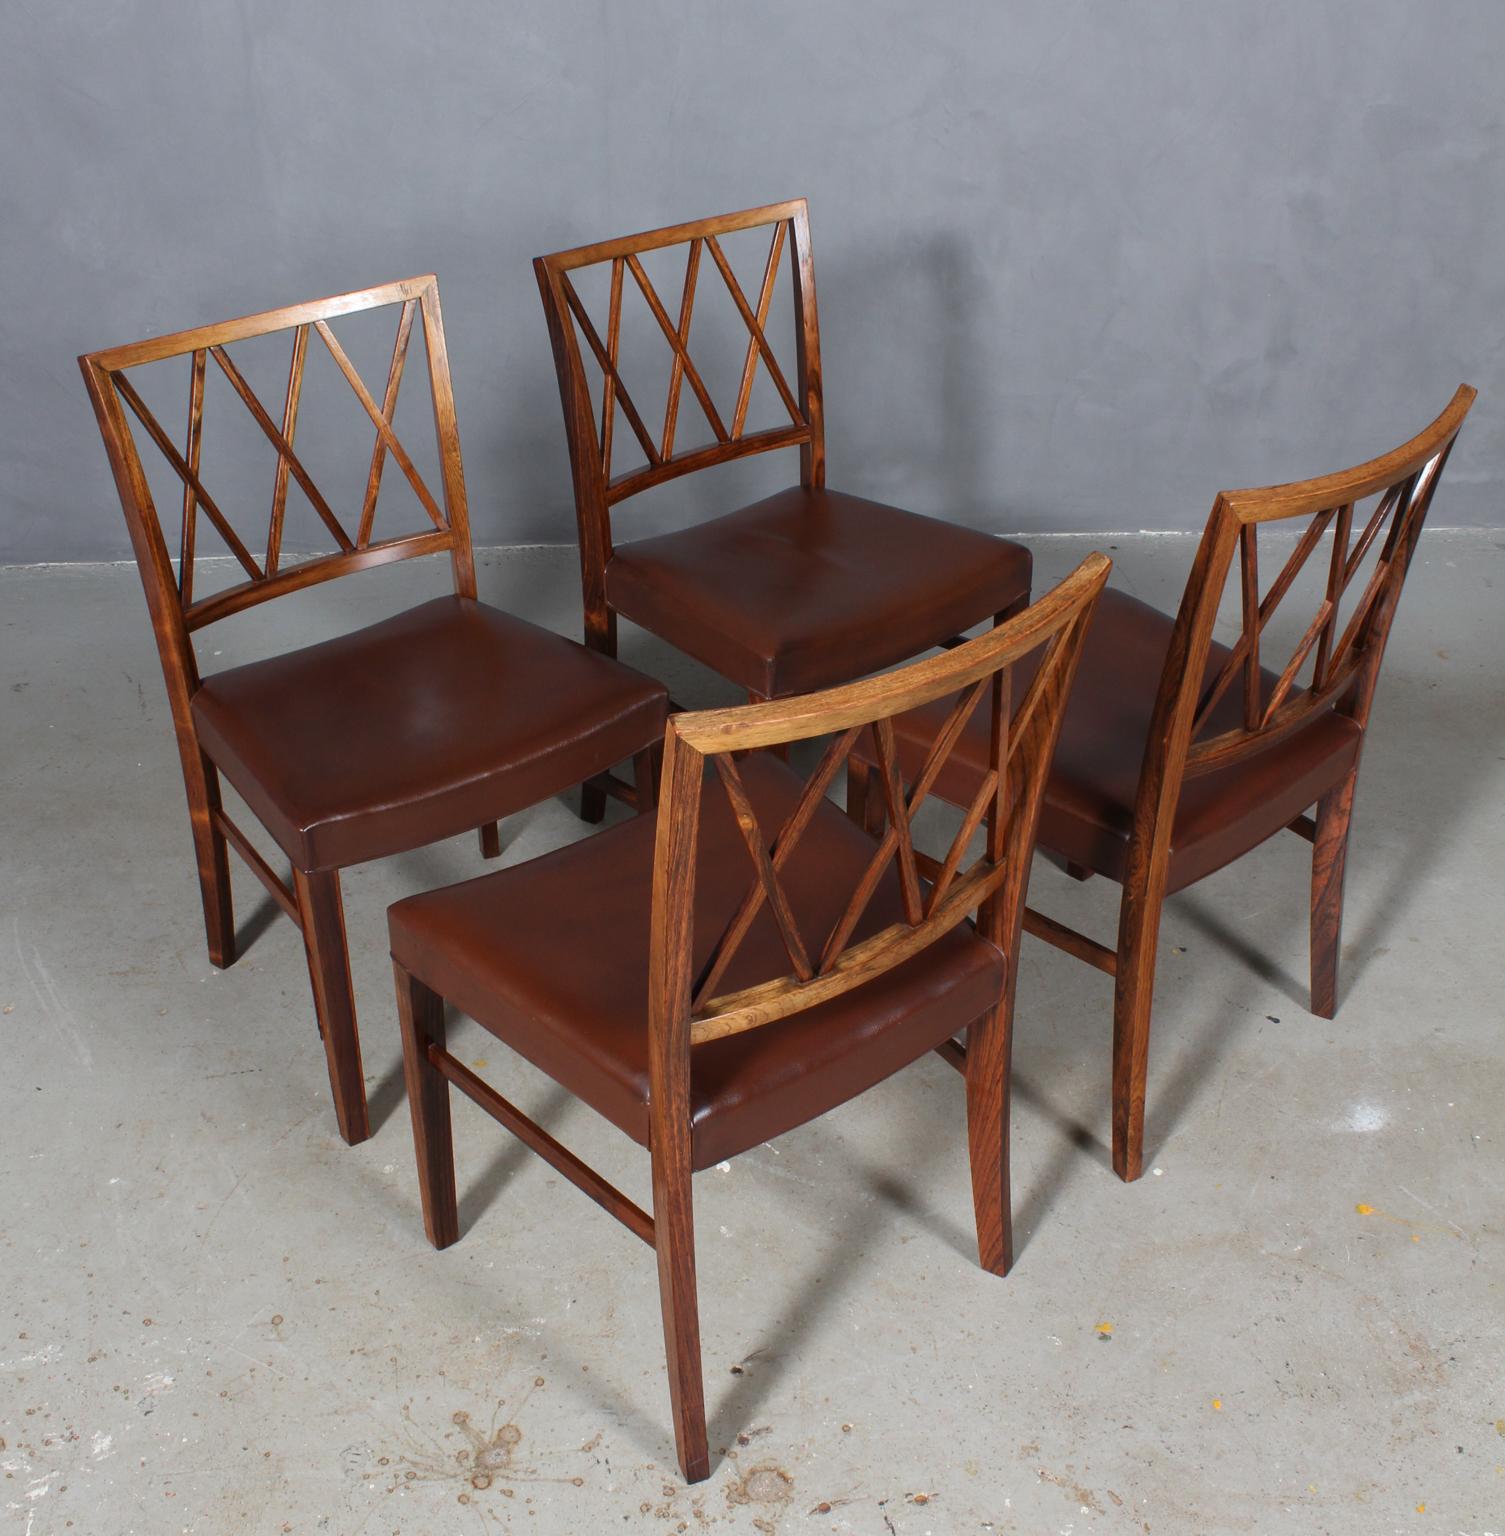 Ole Wanscher set of four dining chairs, upholstered with patinated brown aniline leather.

Made of rosewood, profilated legs.

Made of Slagelse Møbelværk.